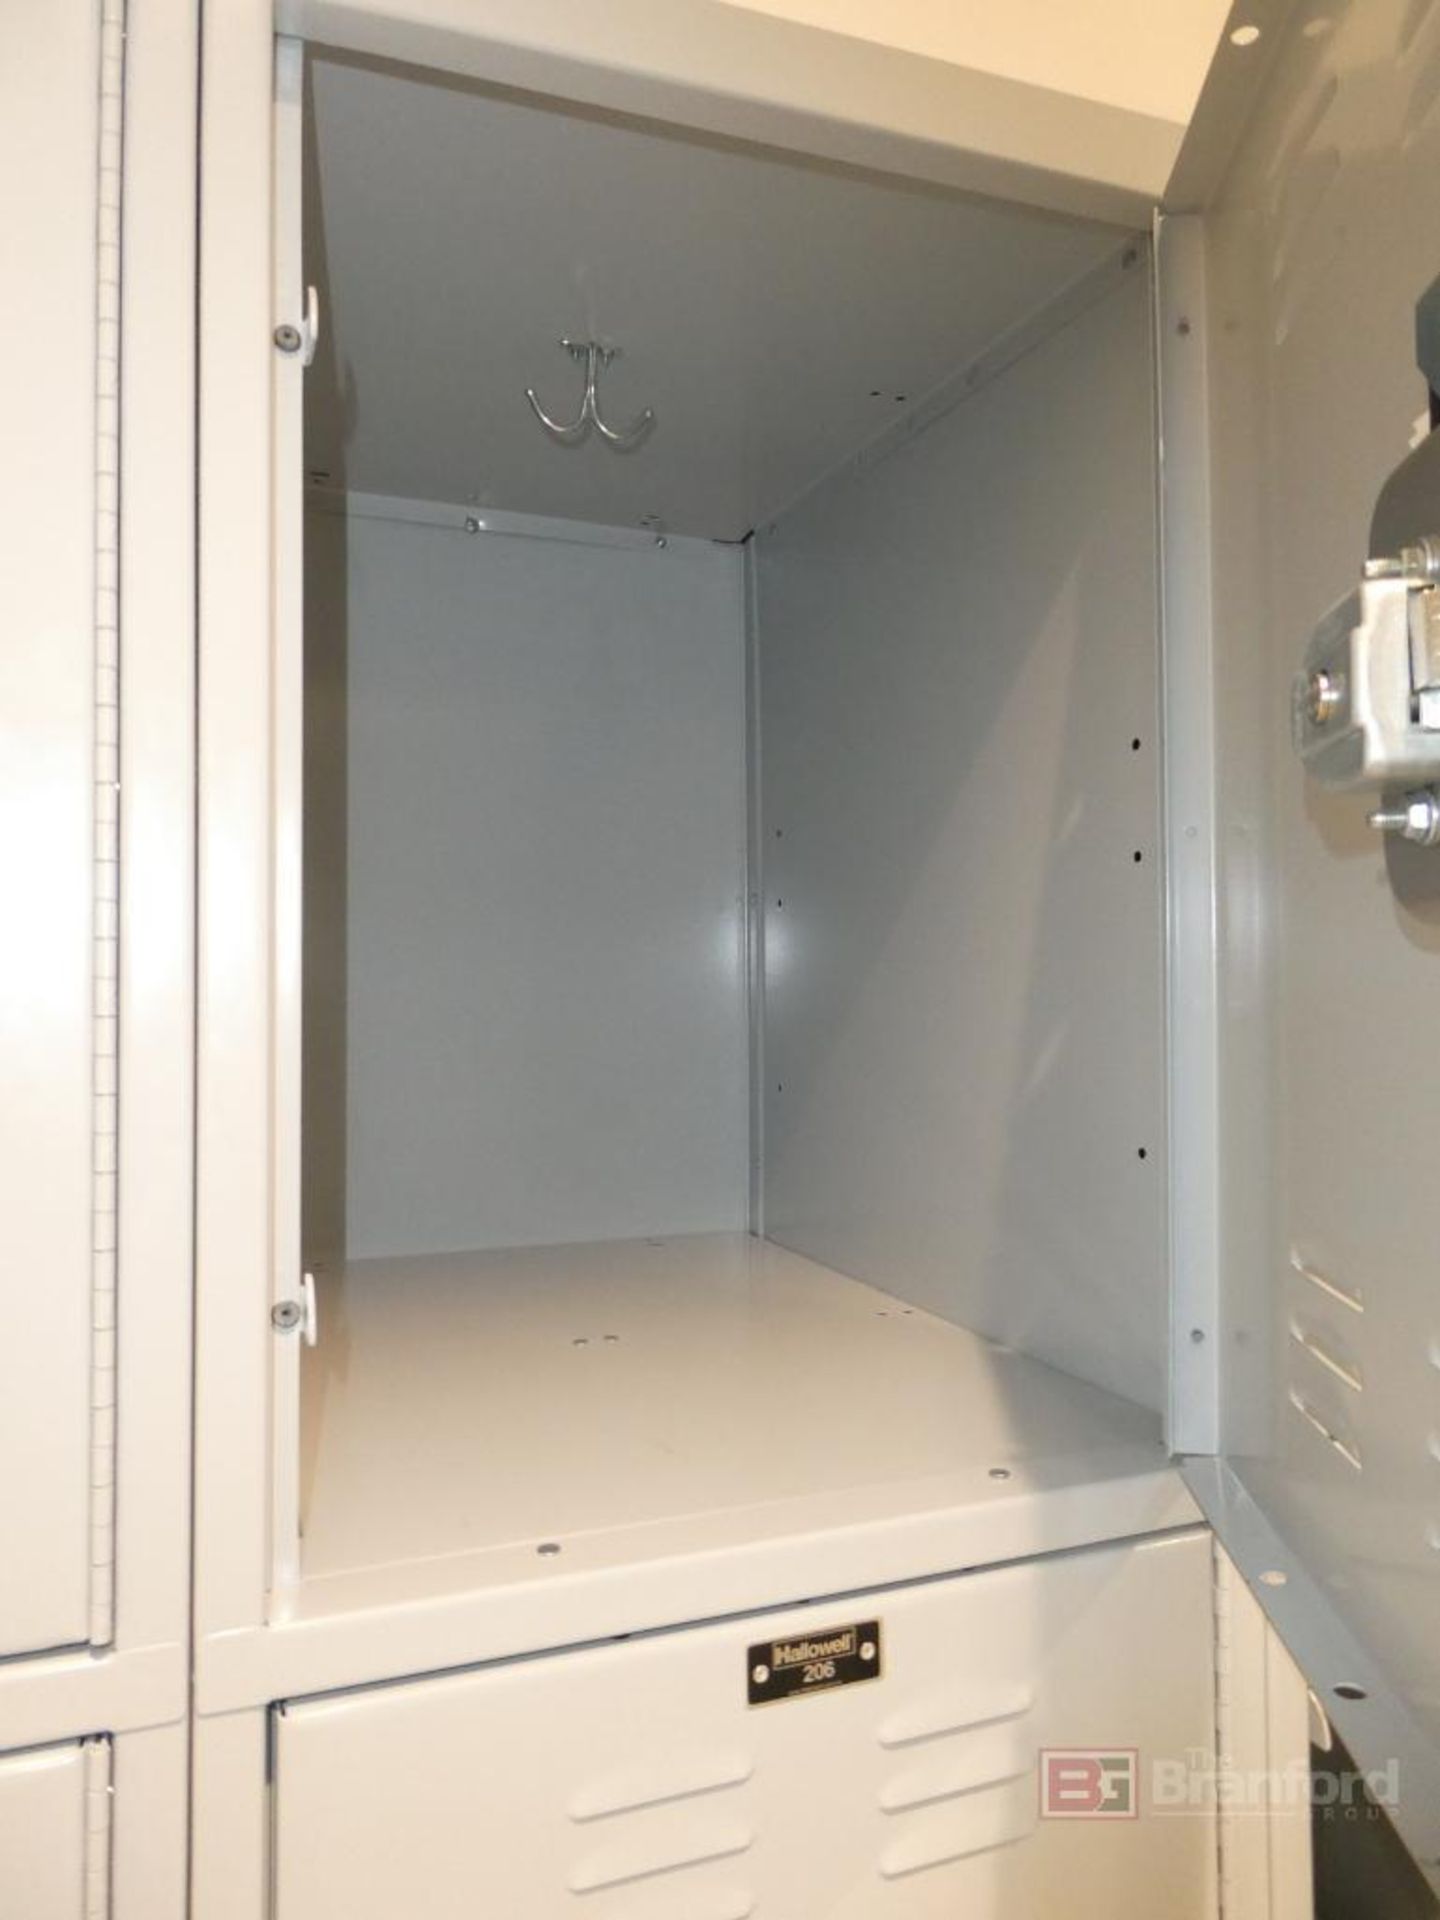 (612) Hallowell Lockers w/ Built-In Combination Lock - Image 3 of 6